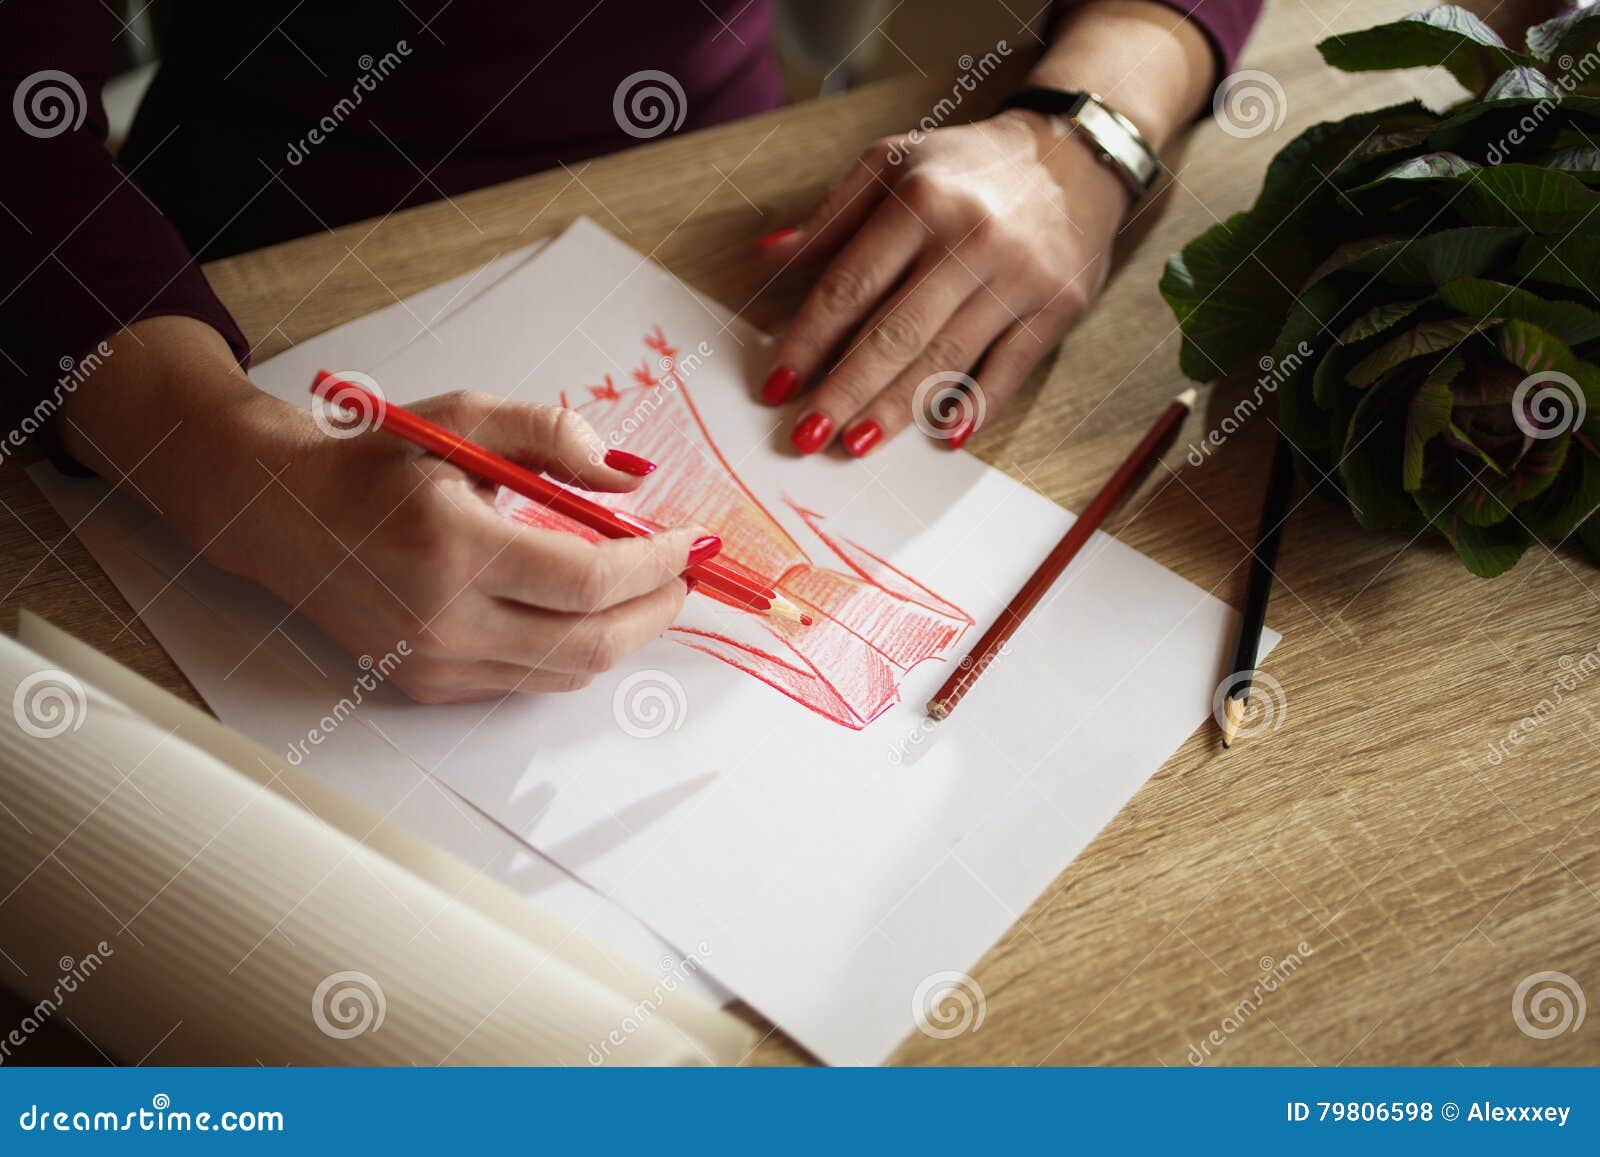 Hands Adult Woman Depicting a Pencil Sketch of the Dress Stock Photo ...